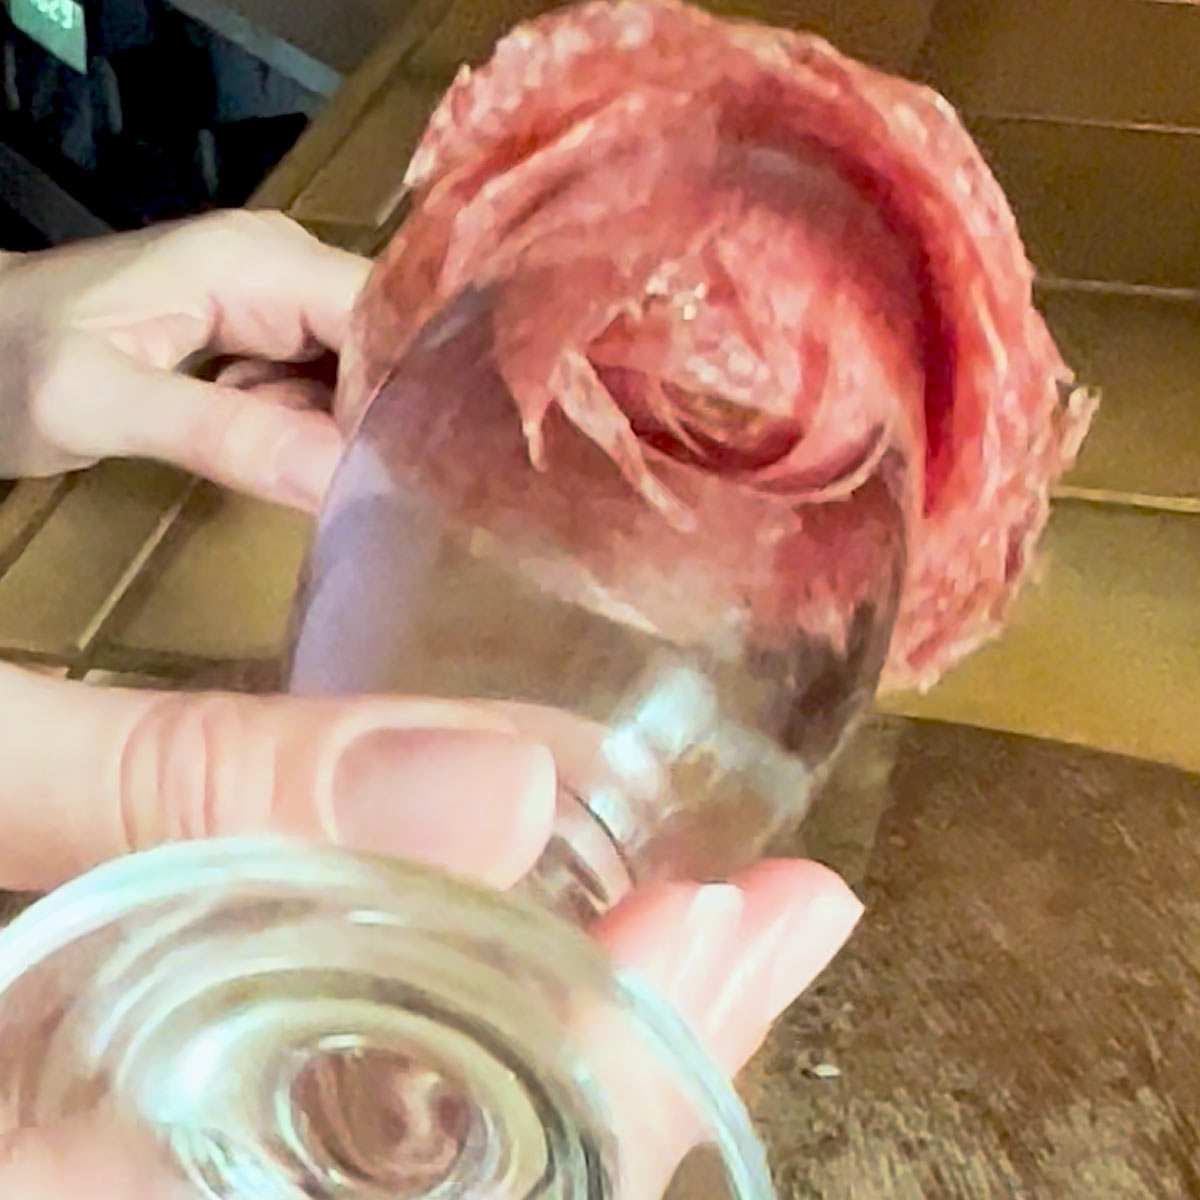 turning glass upside down to reveal the salami rose